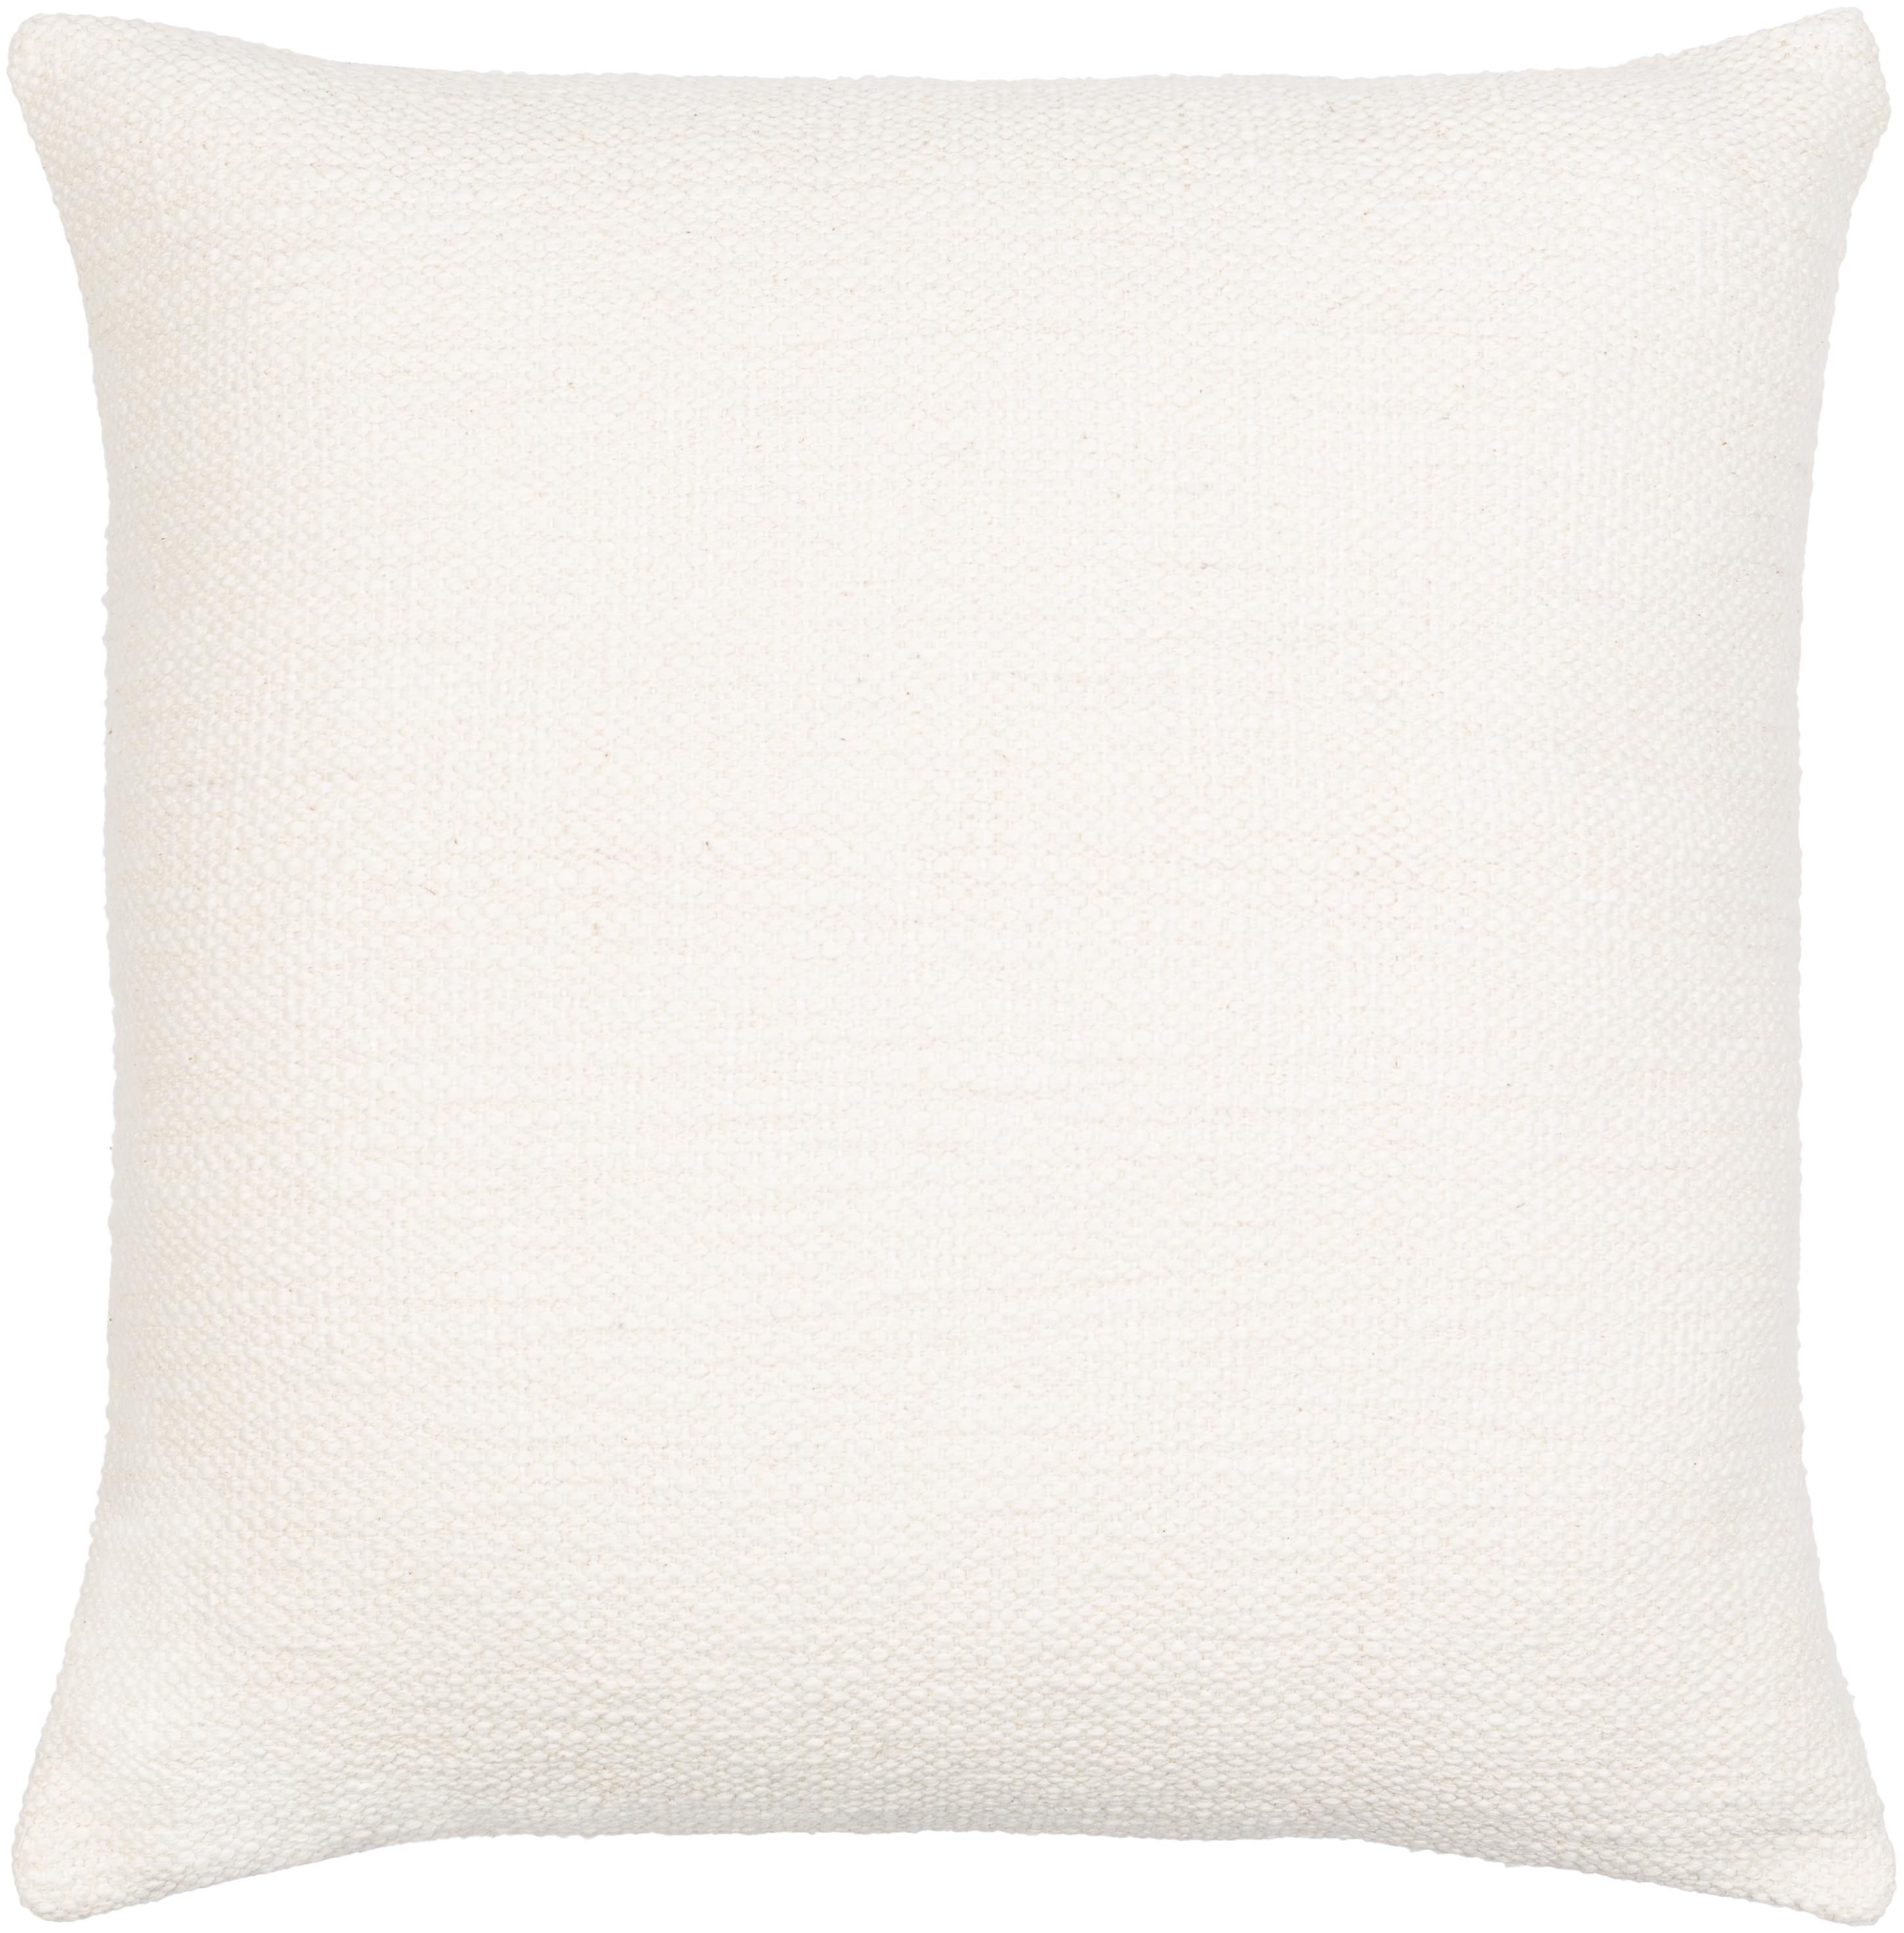 Bisa Throw Pillow, 22" x 22", with down insert - Image 0